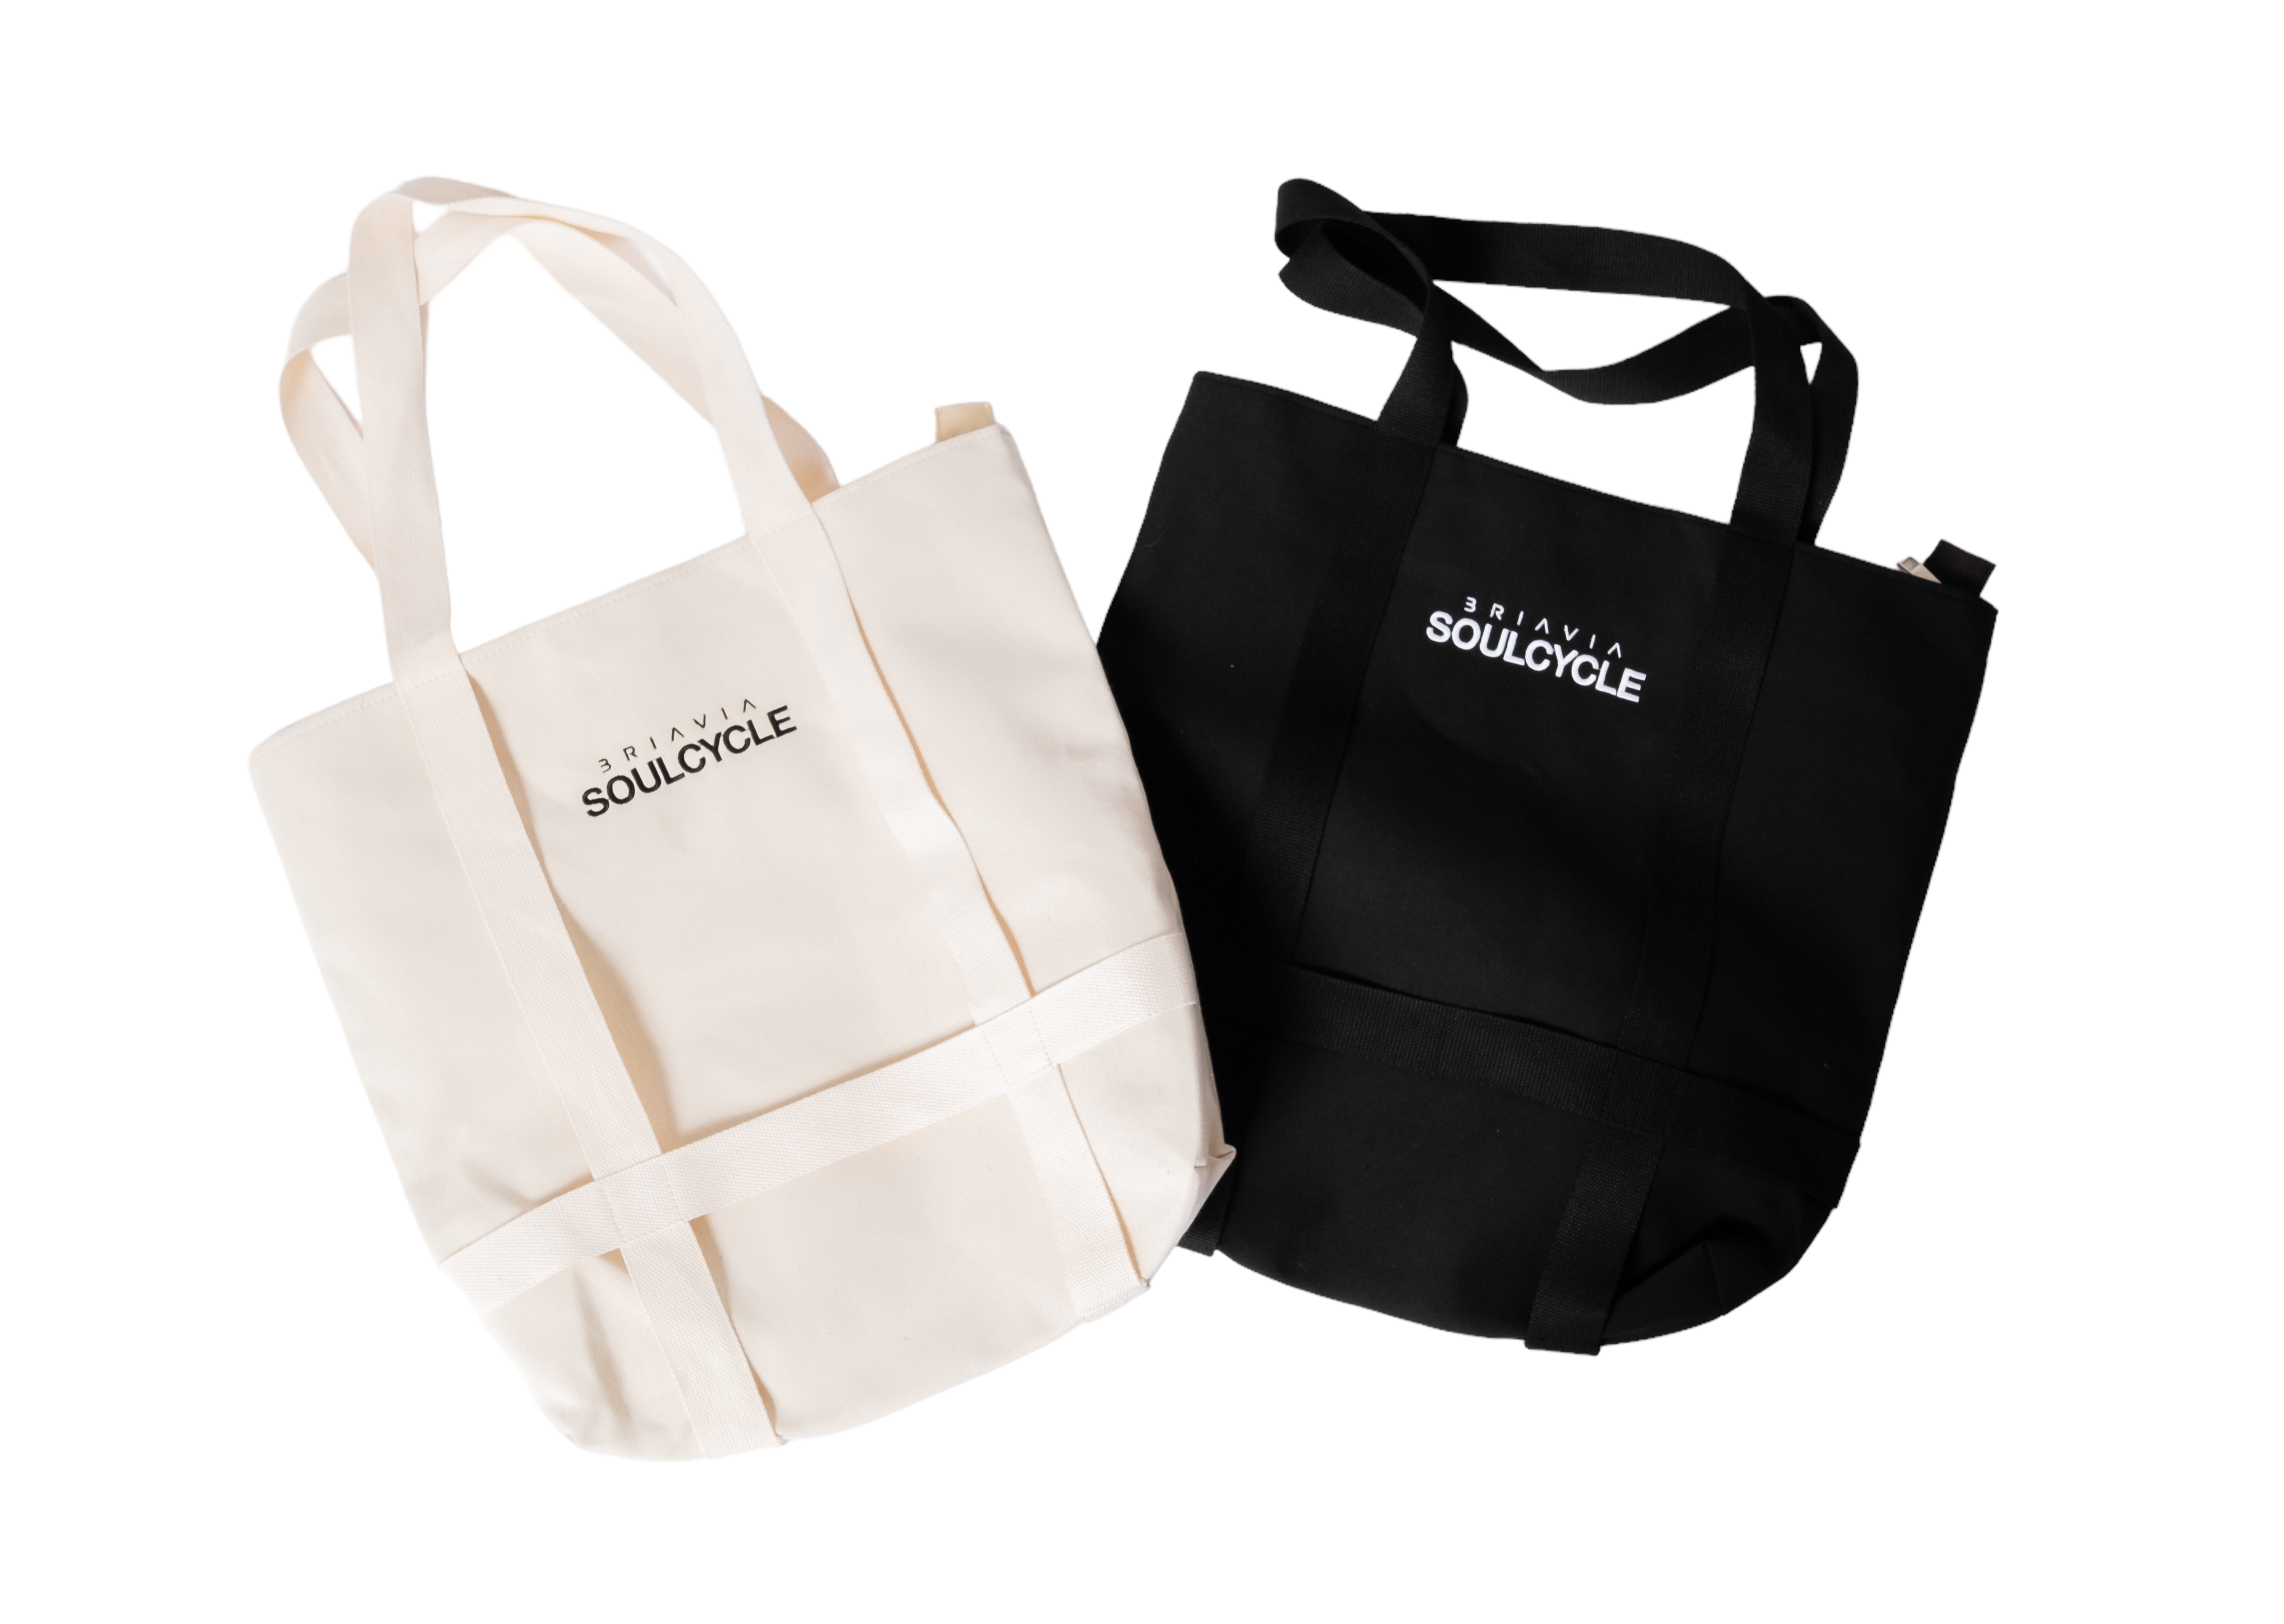 SoulCycle x Briavia Large Canvas Tote Bag